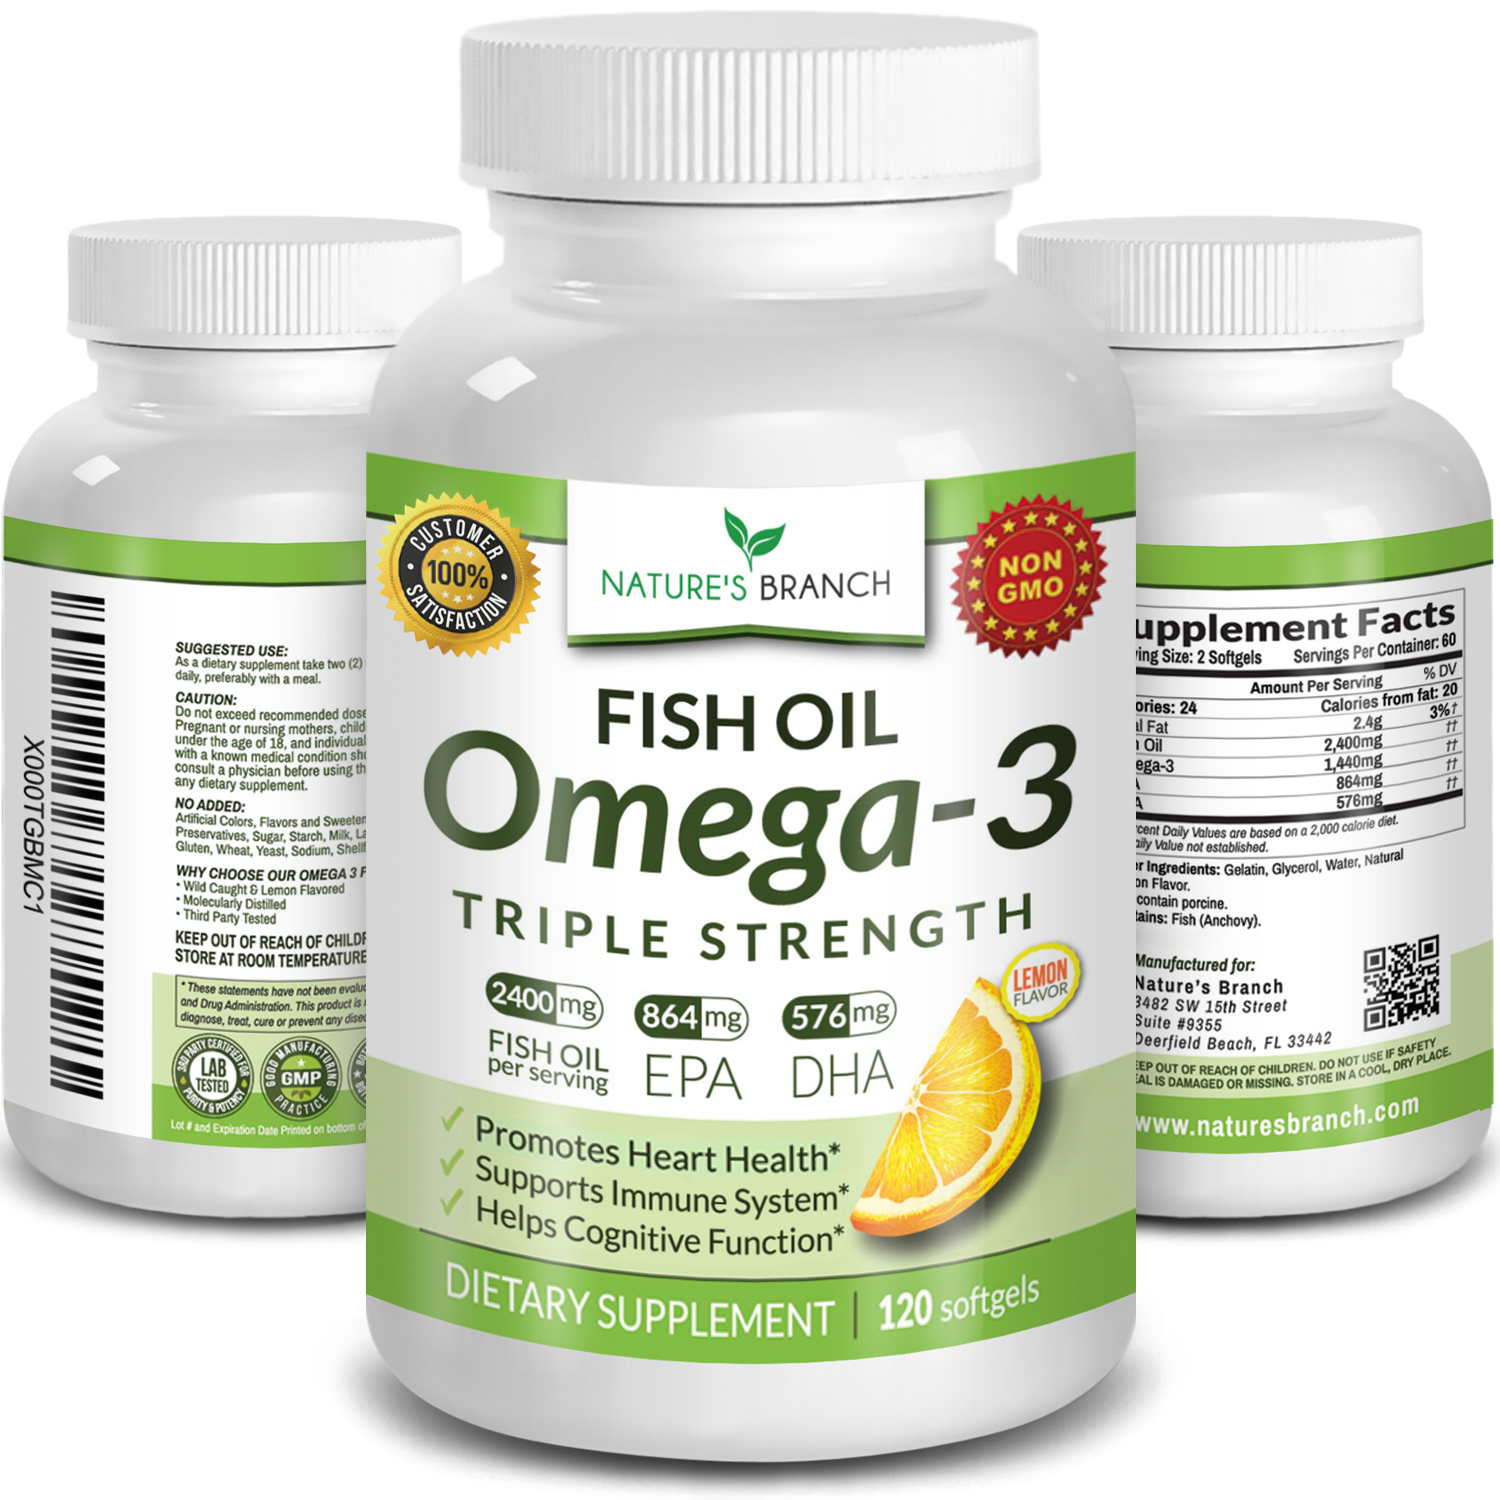 Nature's Branch Omega 3 Fish Oil supplements with 120 softgels